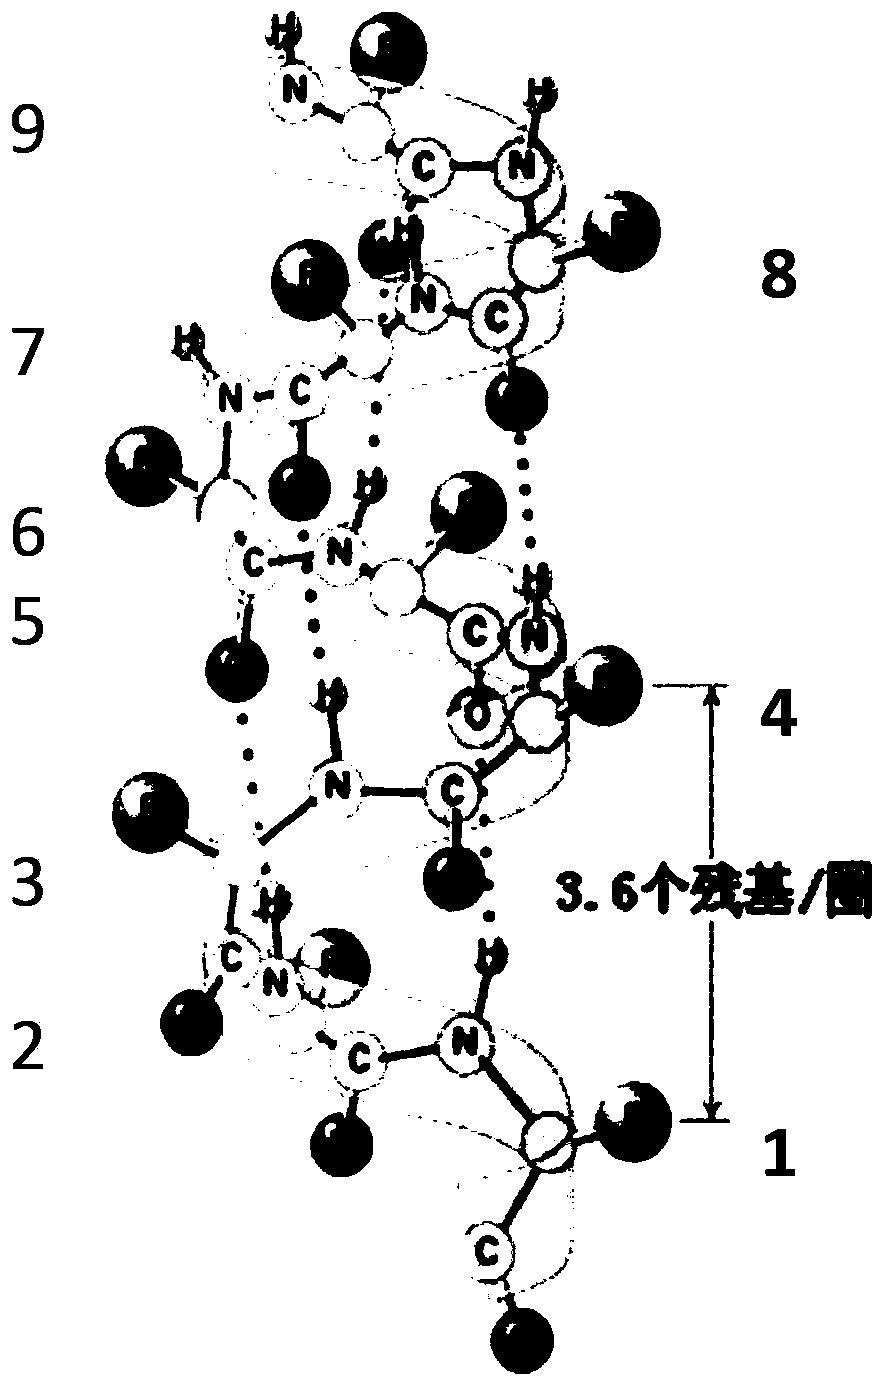 Amphiphilic alpha helix self-assembling peptide and application thereof